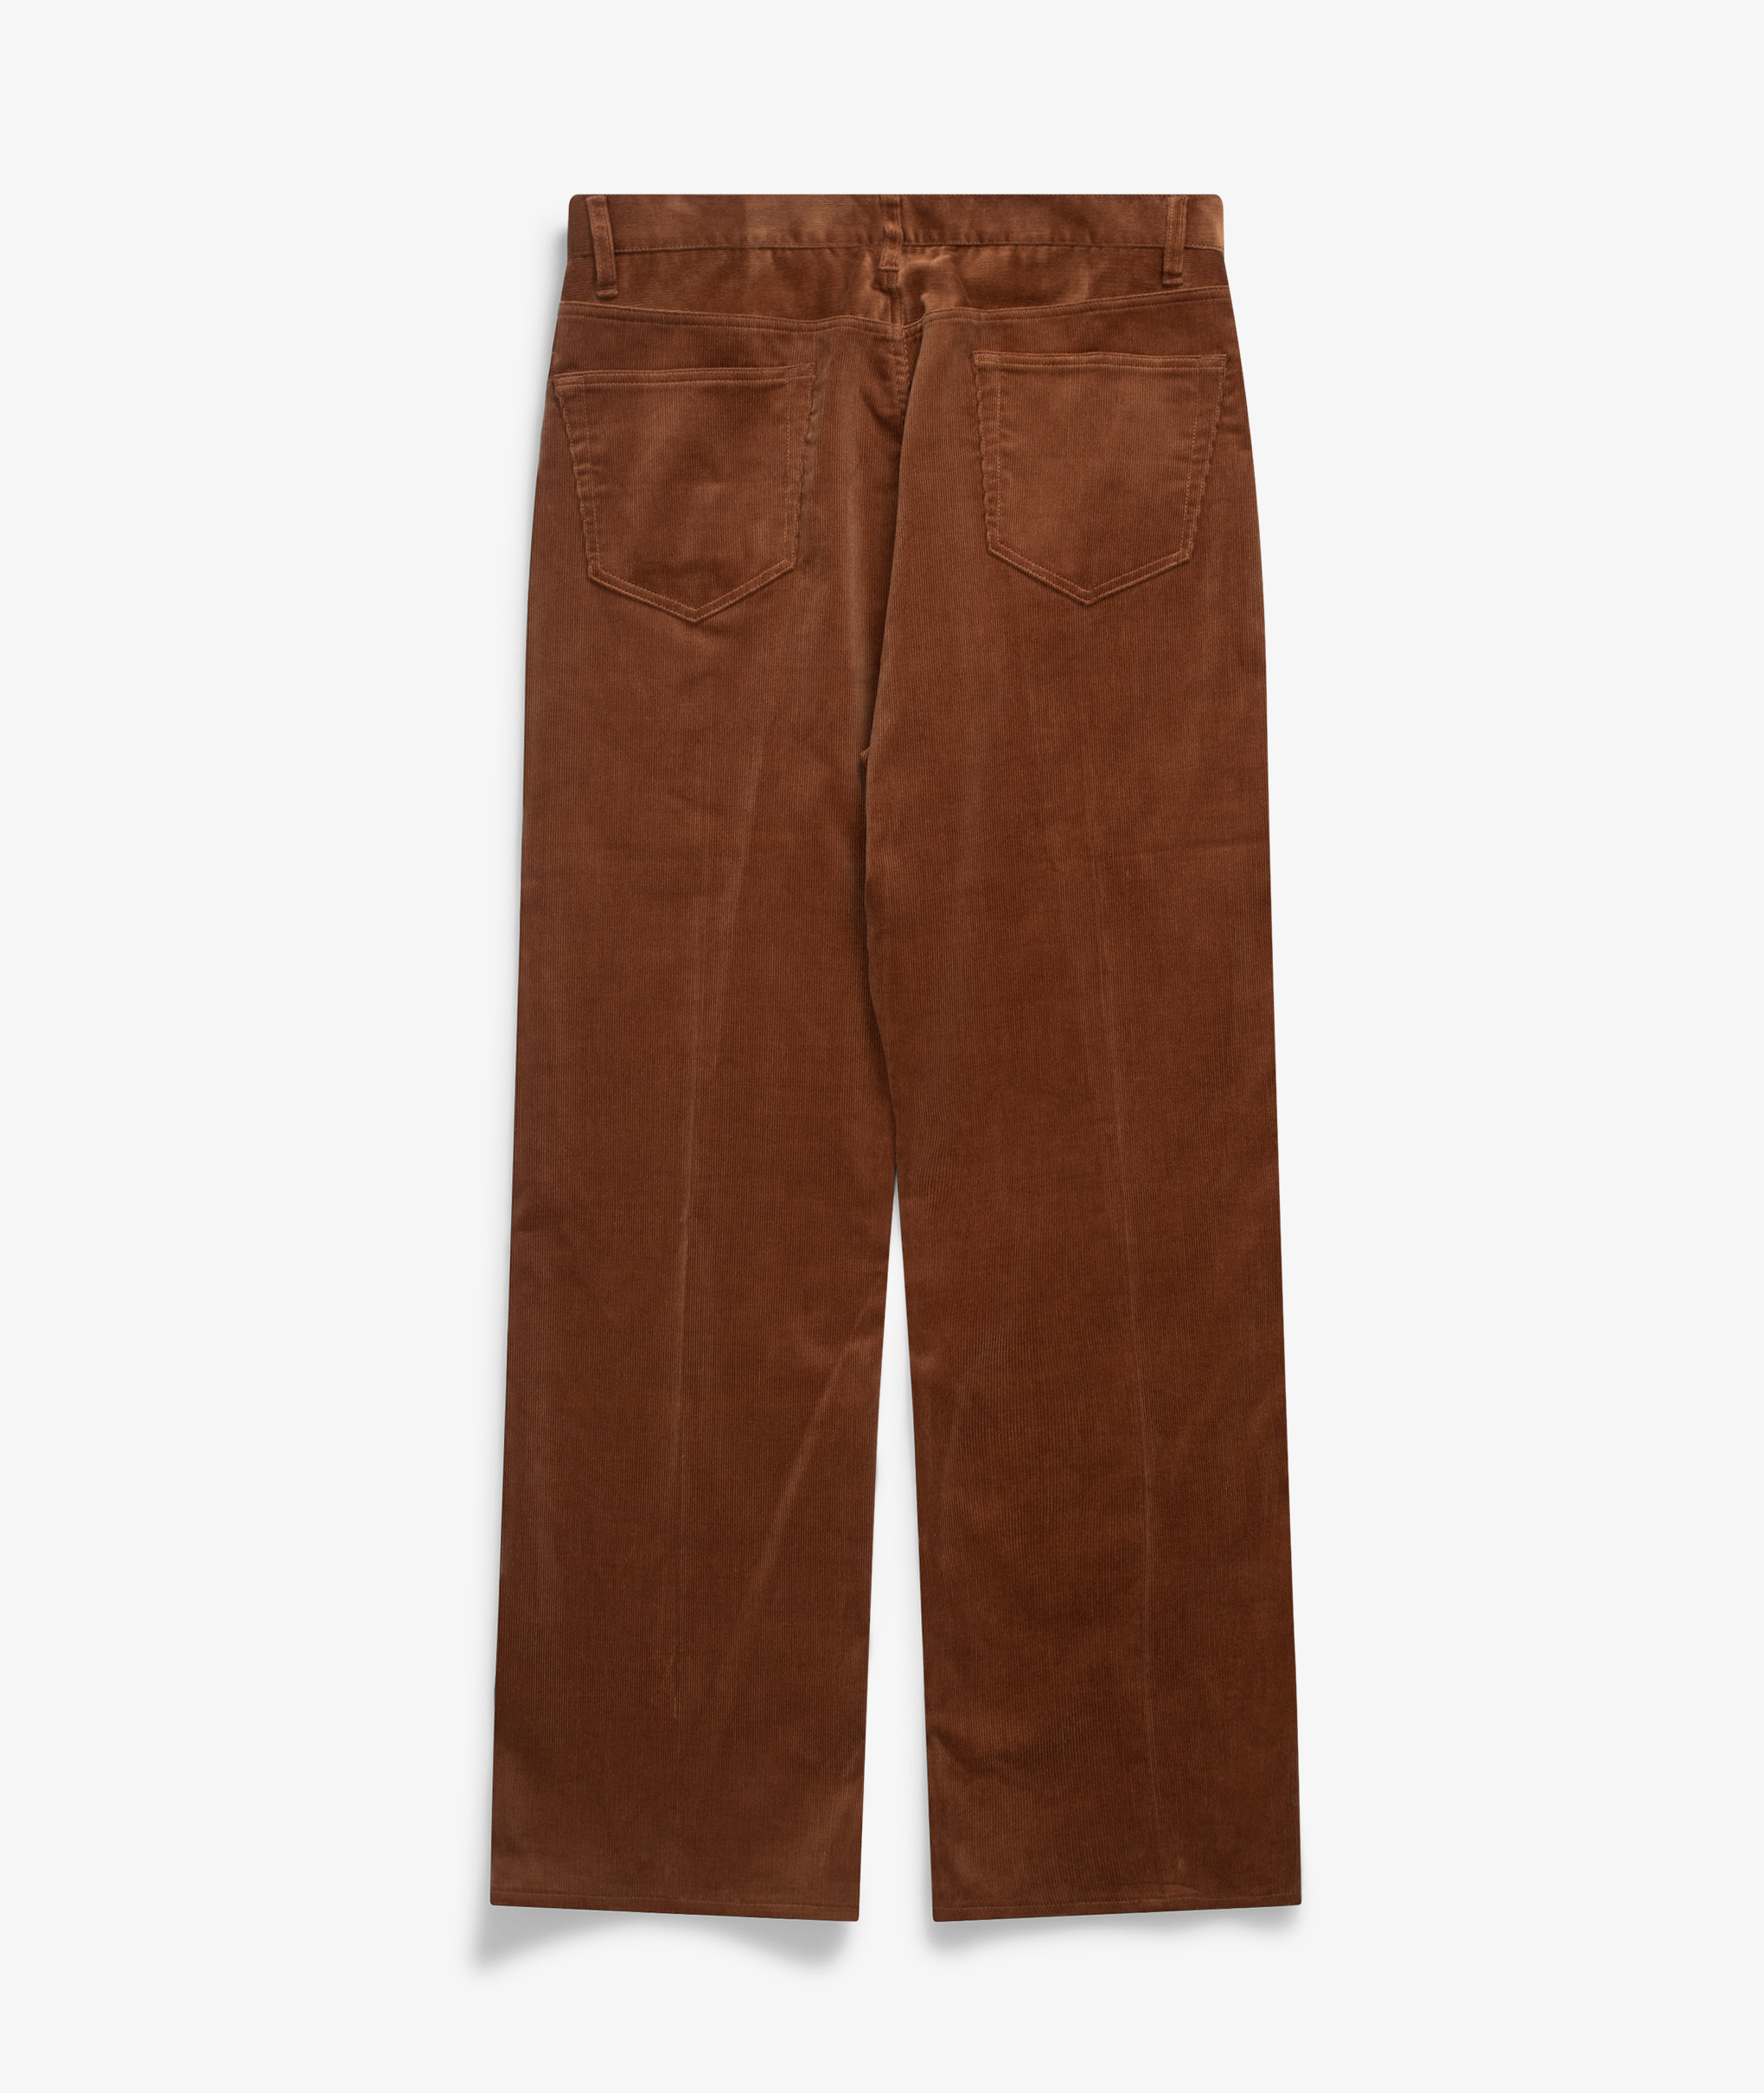 Norse Store | Shipping Worldwide - Auralee Finx Corduroy Pants